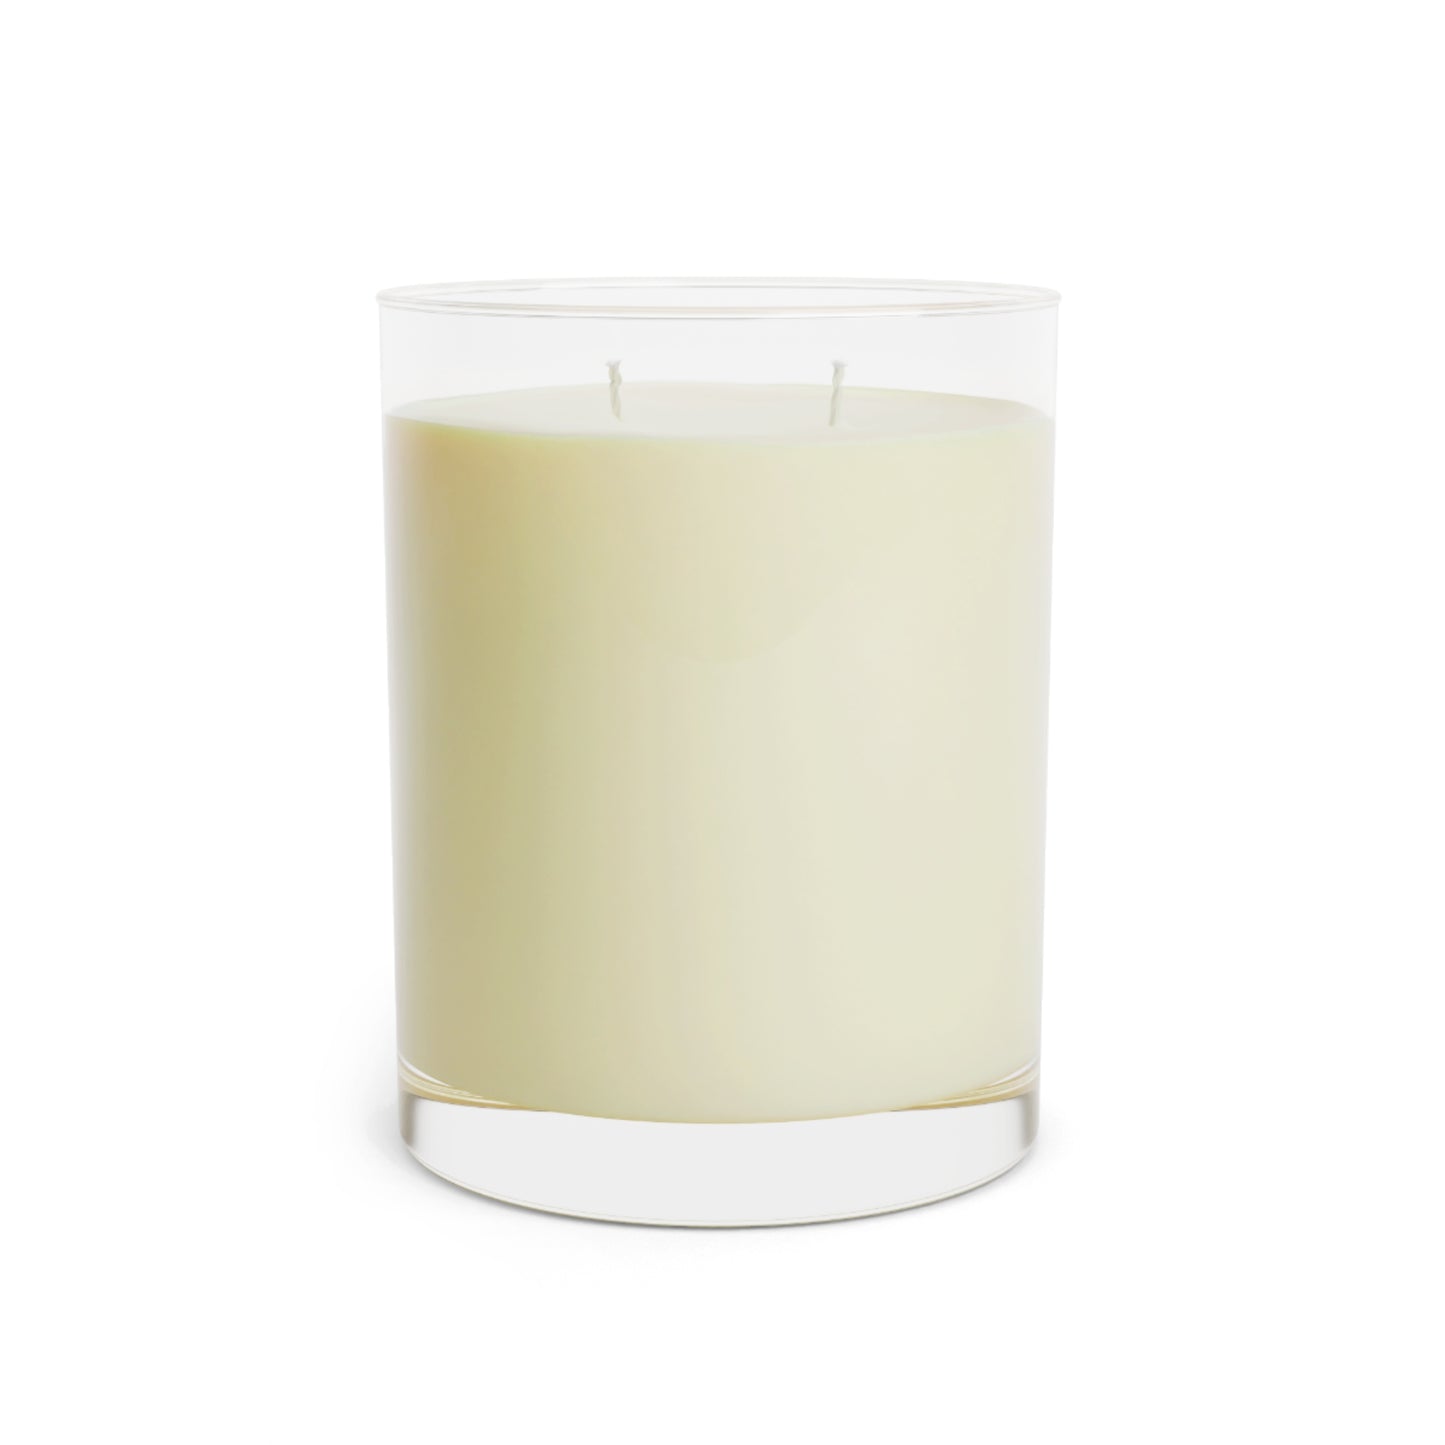 EL423 Vintage on Glass /Scented Candle